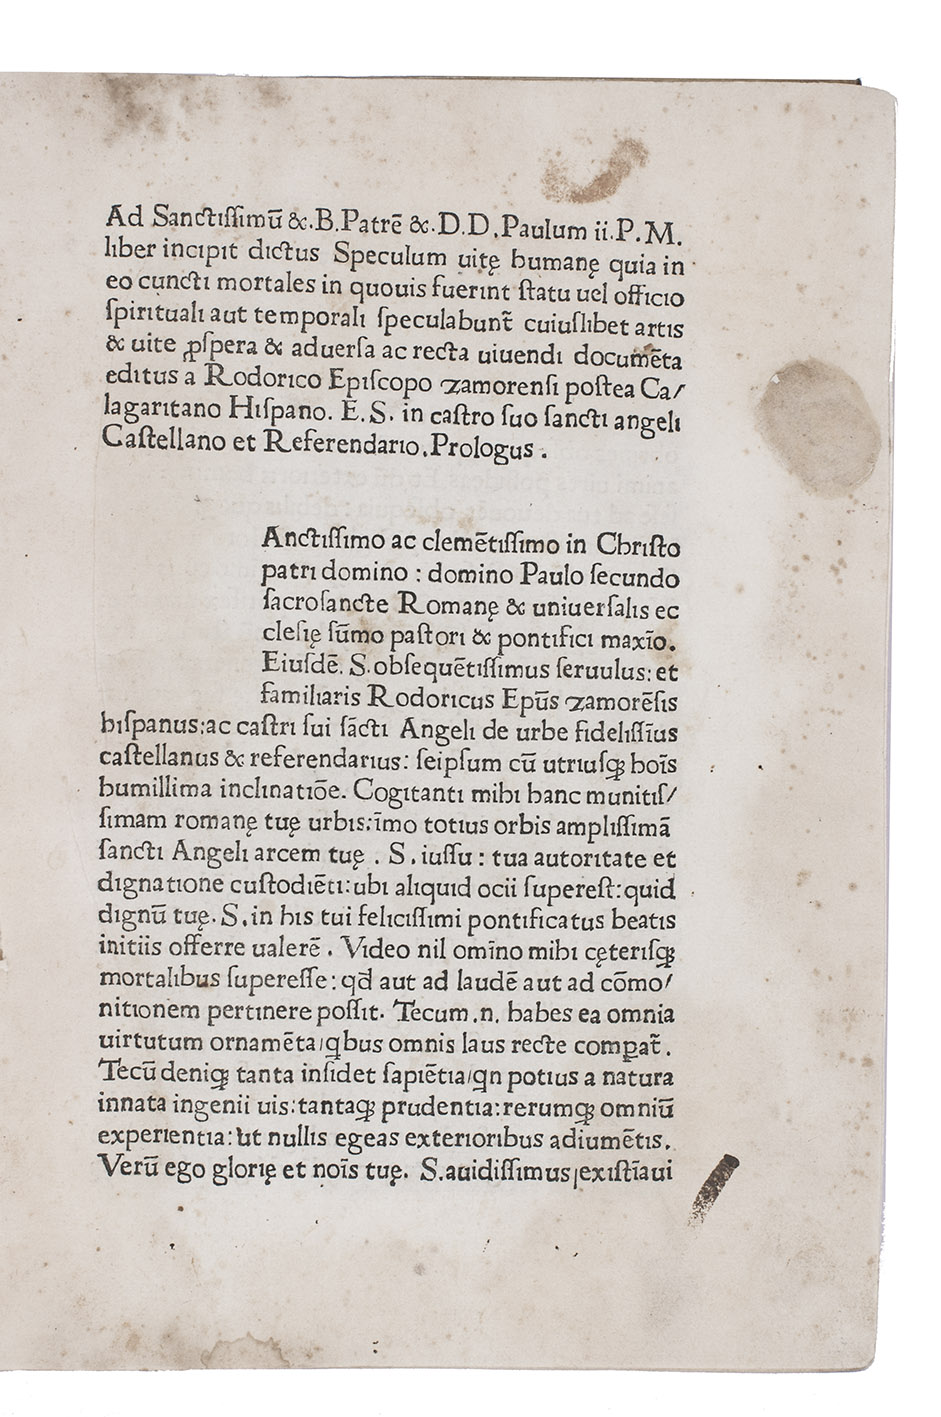 SNCHEZ DE ARVALO, Rodrigo (Rodericus SANCIUS or ZAMORENSIS). - Speculum vit[a]e human[a]e. Rome, Joannes Philippus de Lignamine, 31 July 1473. Small folio (26.5 x 20 cm). With spaces left for 2 large (6-line) and about 80 small (3-line) initials. Text block 19.5 x 11.5 mm with 31 lines per page. Set in a single roman type throughout (Lignamine 125R). Limp sheepskin parchment (ca. 1740/50).